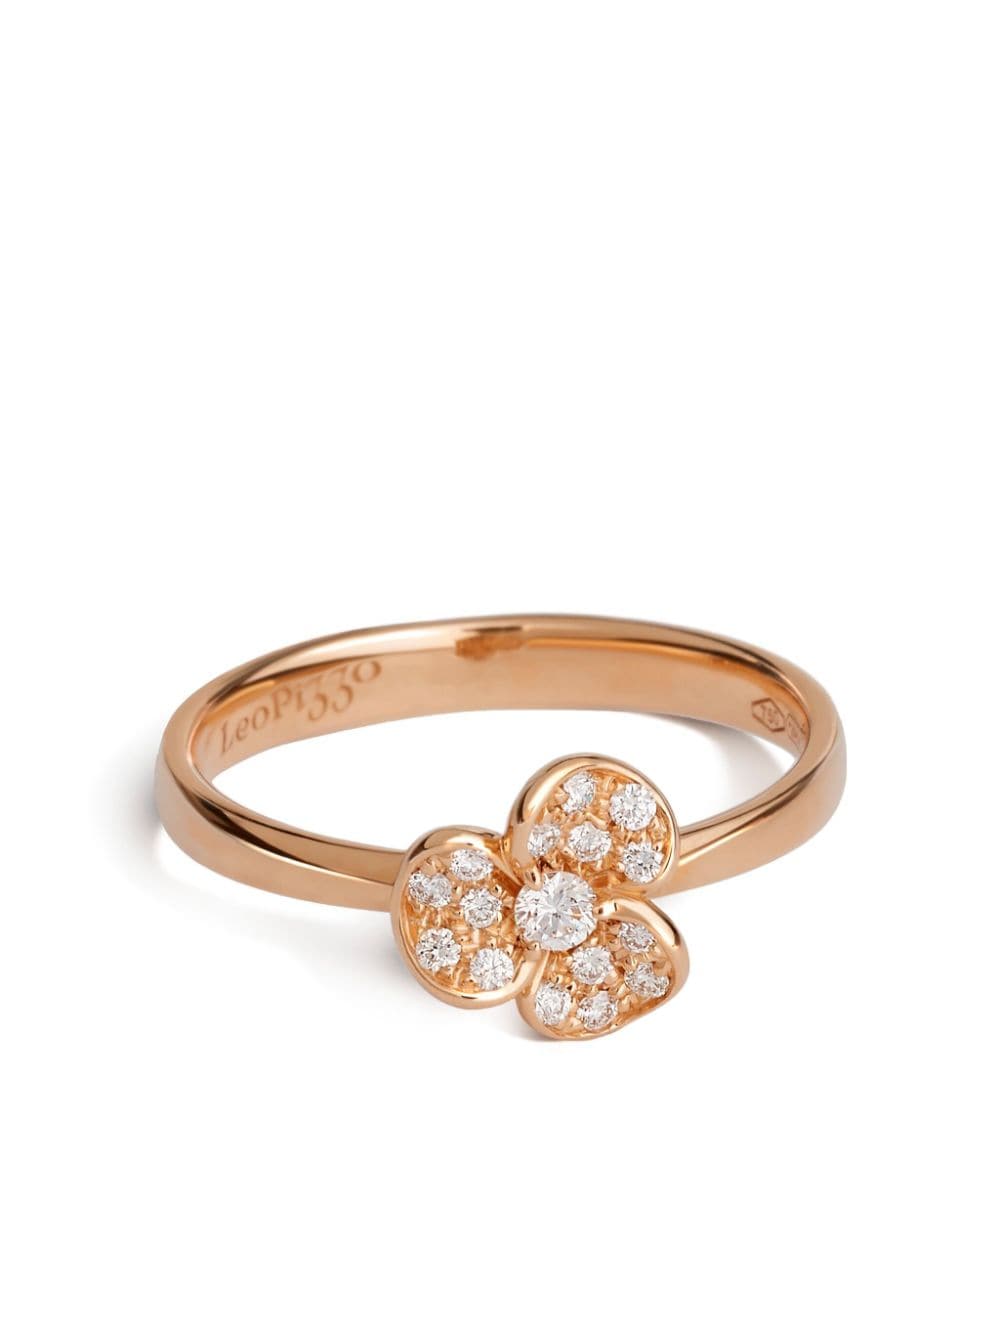 LEO PIZZO Candy Flora cocktail ring - Pink von LEO PIZZO